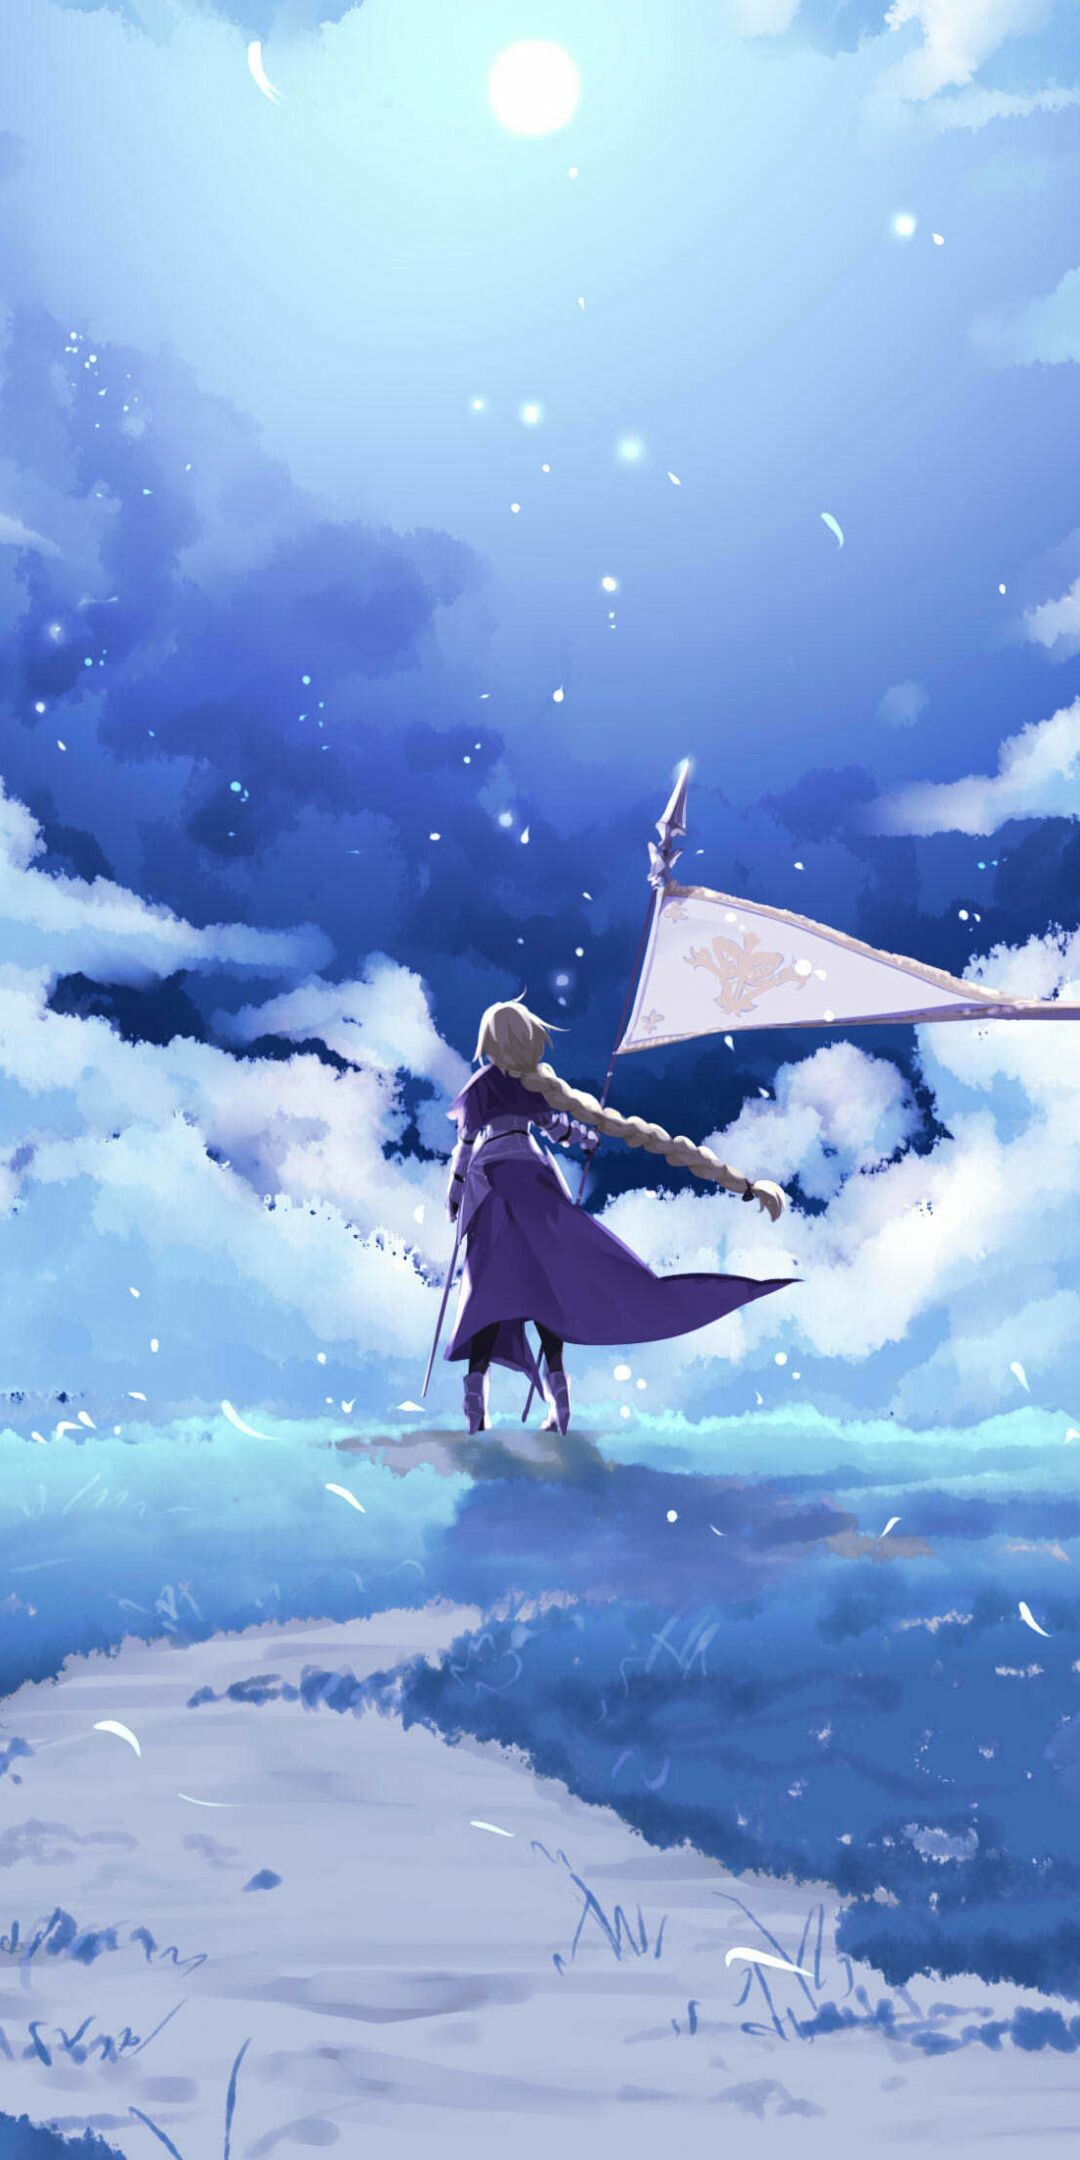 Fate/stay night: Heaven's Feel: Fate/Grand Order, A free-to-play Japanese mobile game. 1080x2160 HD Background.